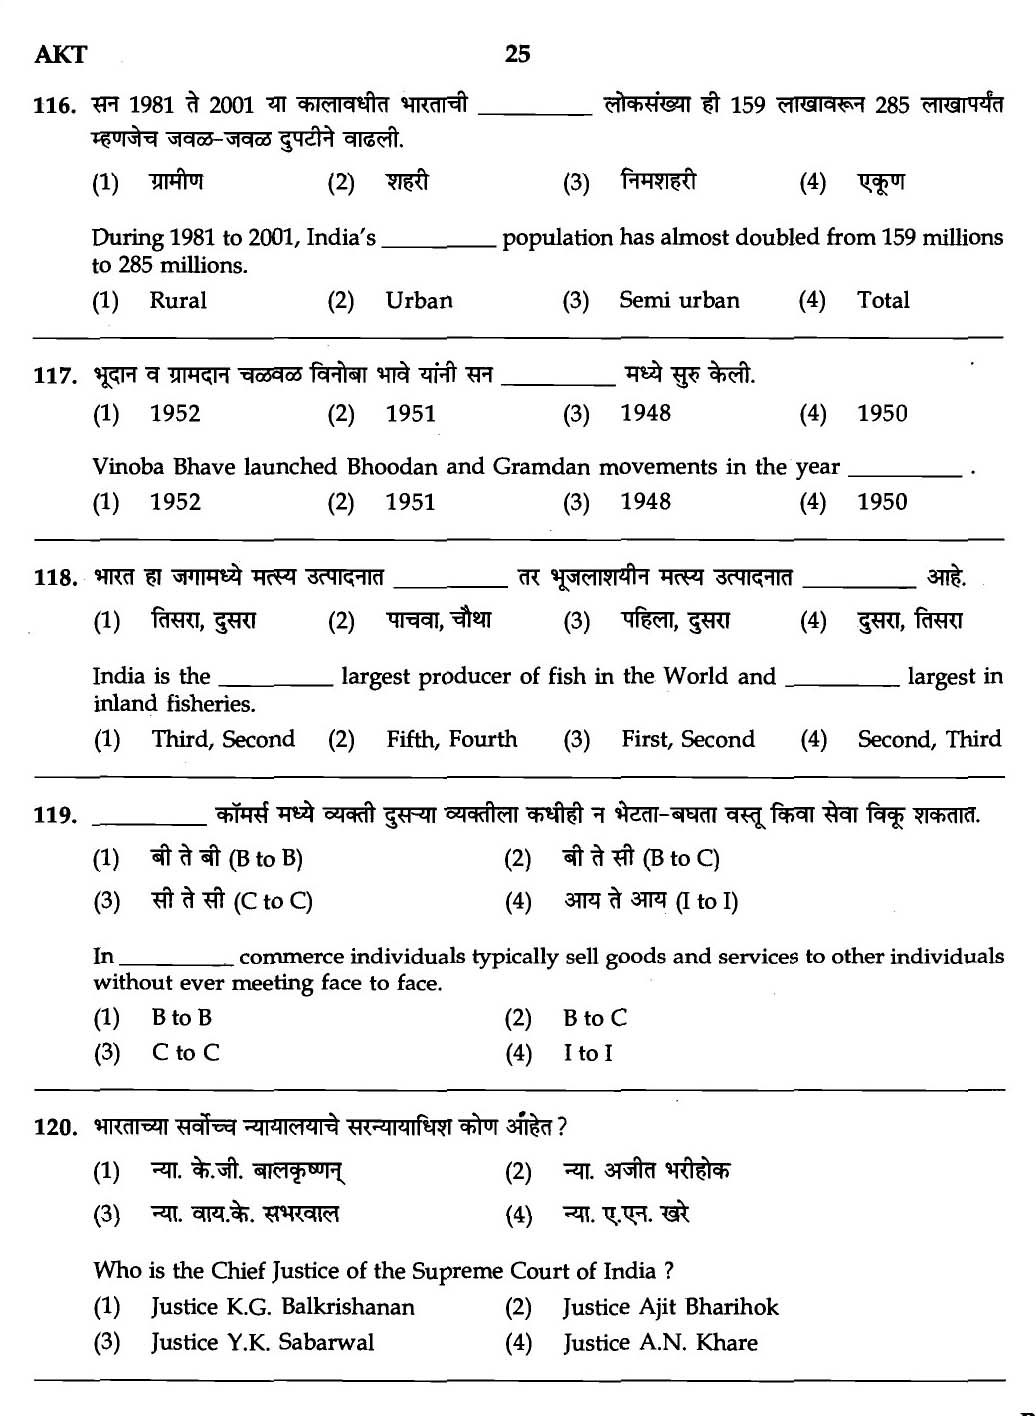 MPSC Agricultural Services Exam 2007 General Question Paper 23